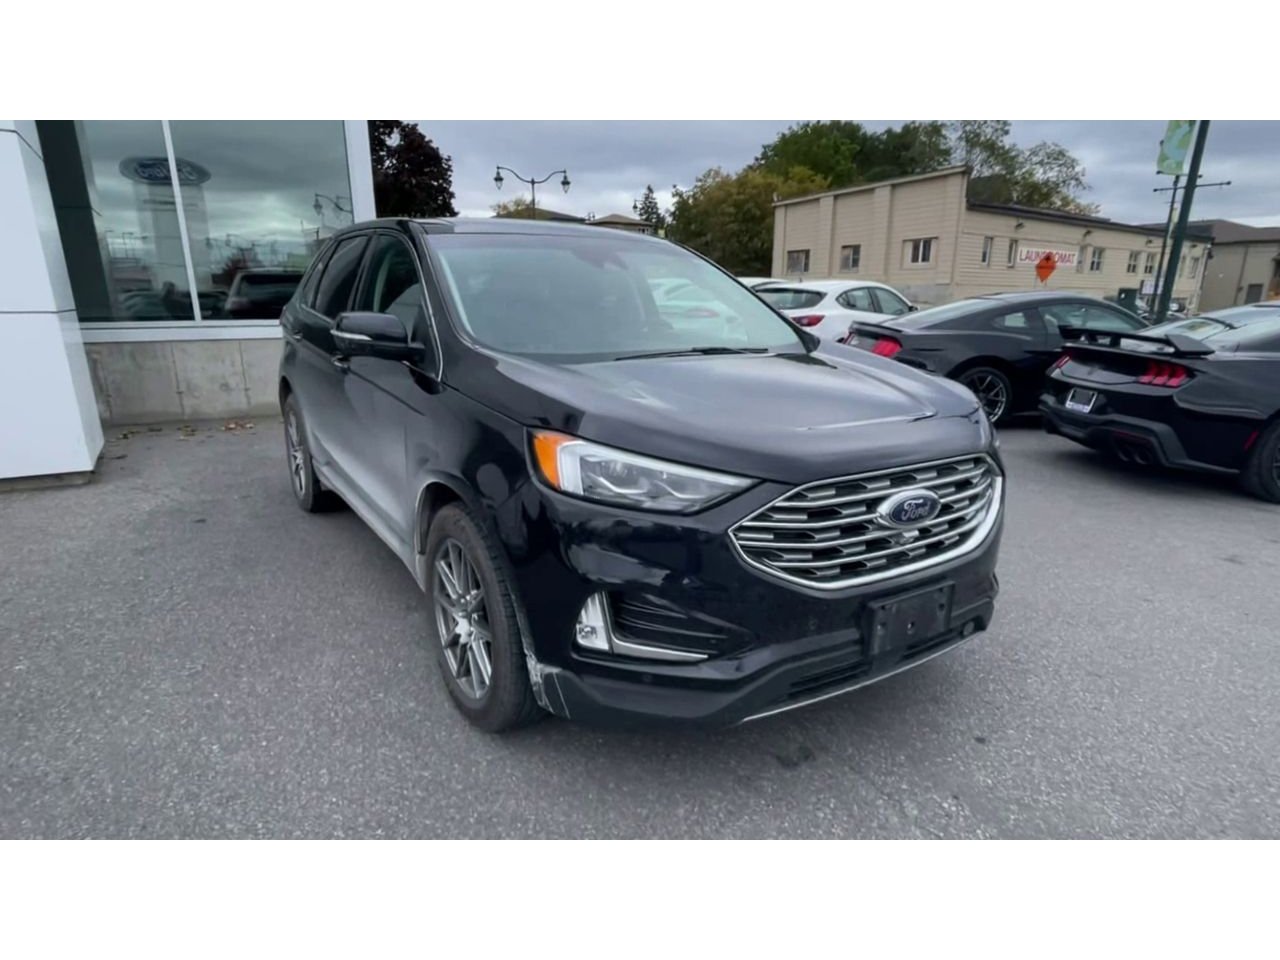 2020 Ford Edge - P21357A Full Image 3